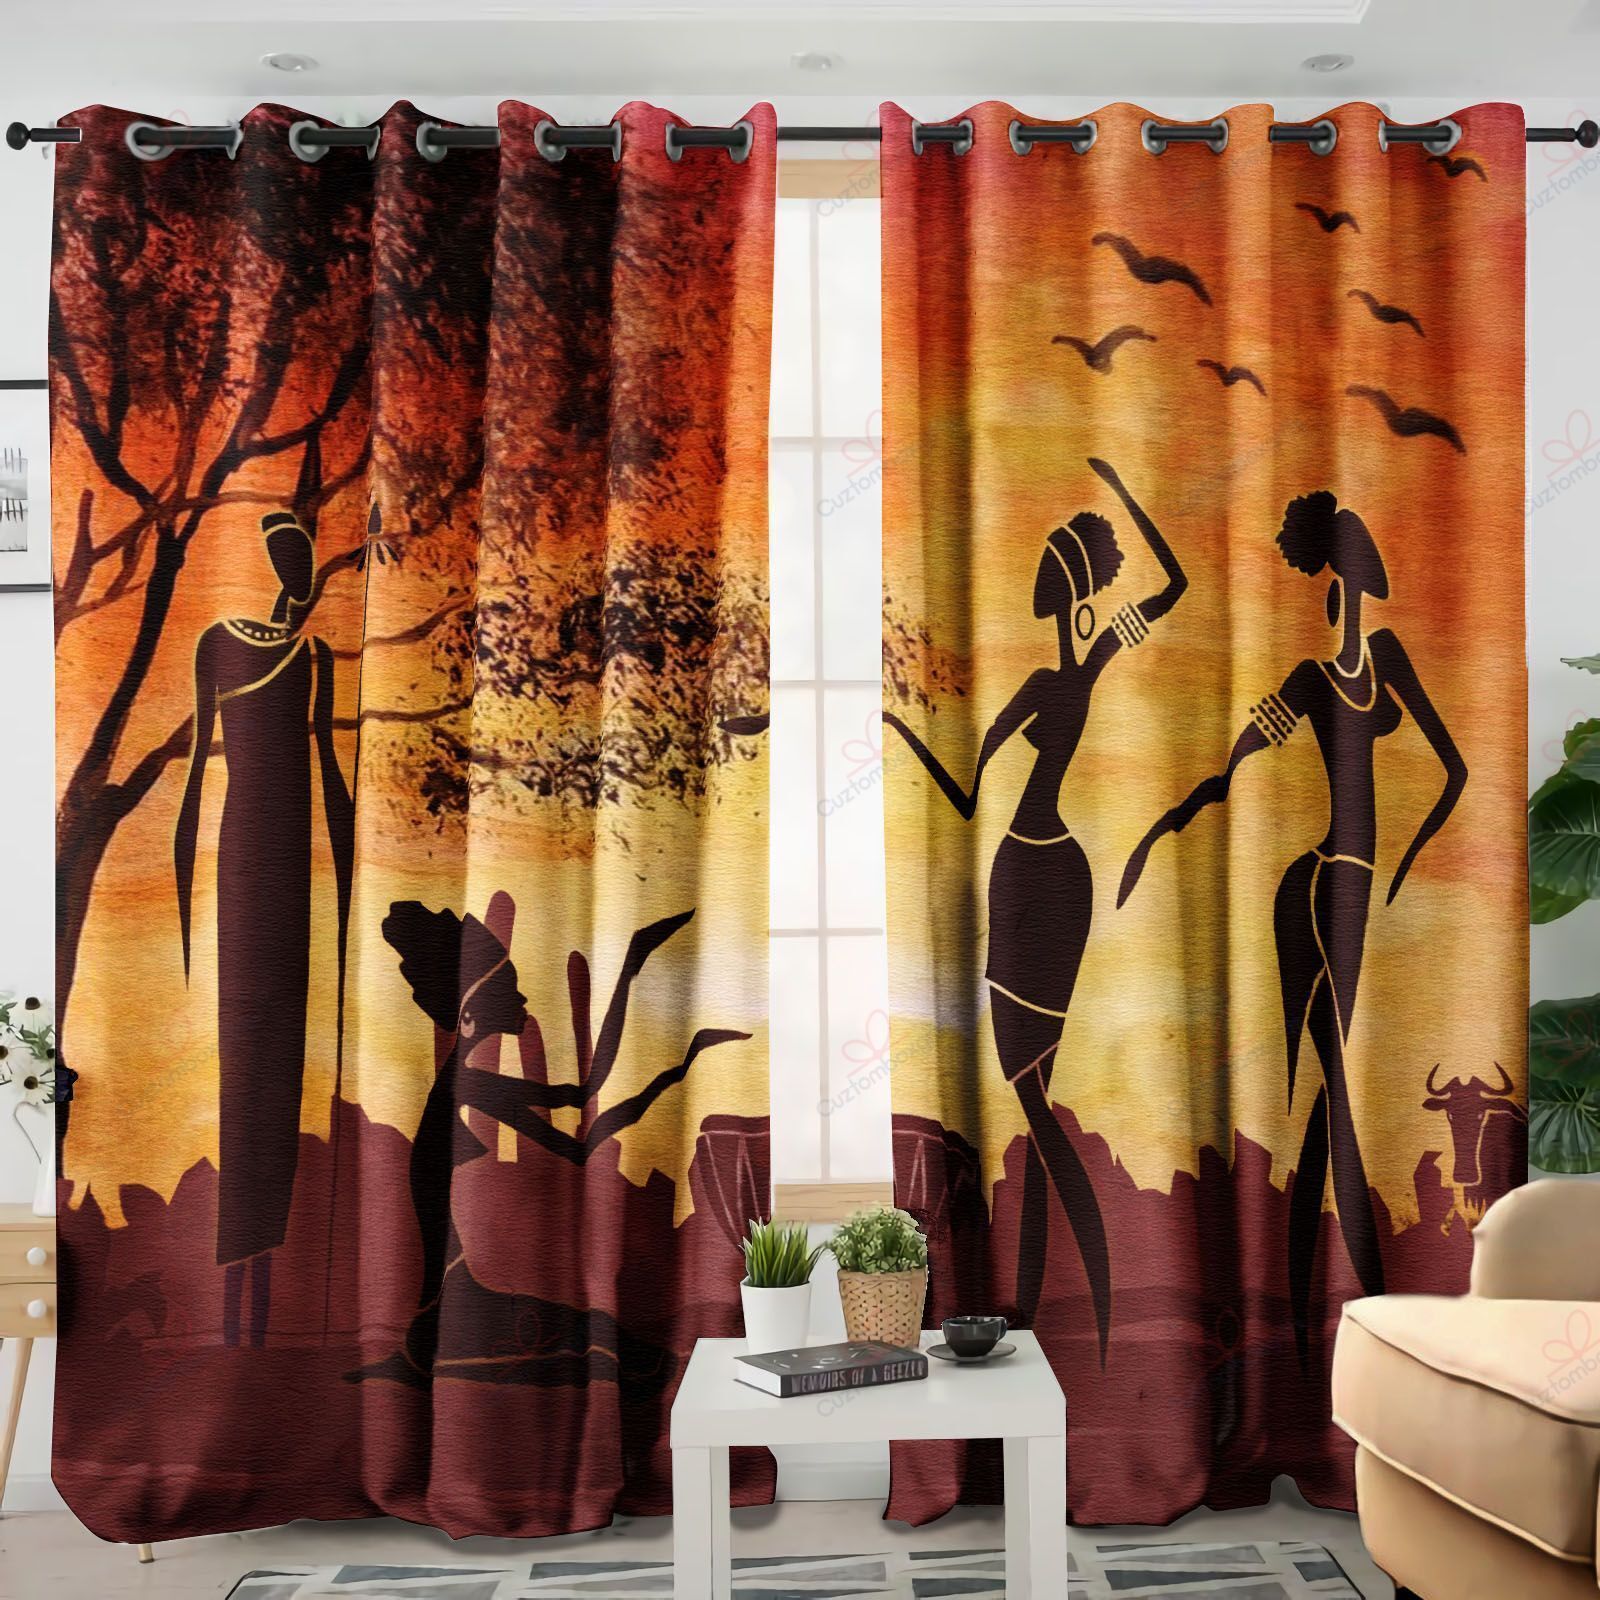 African Vintage Design Printed Window Curtain Home Decor